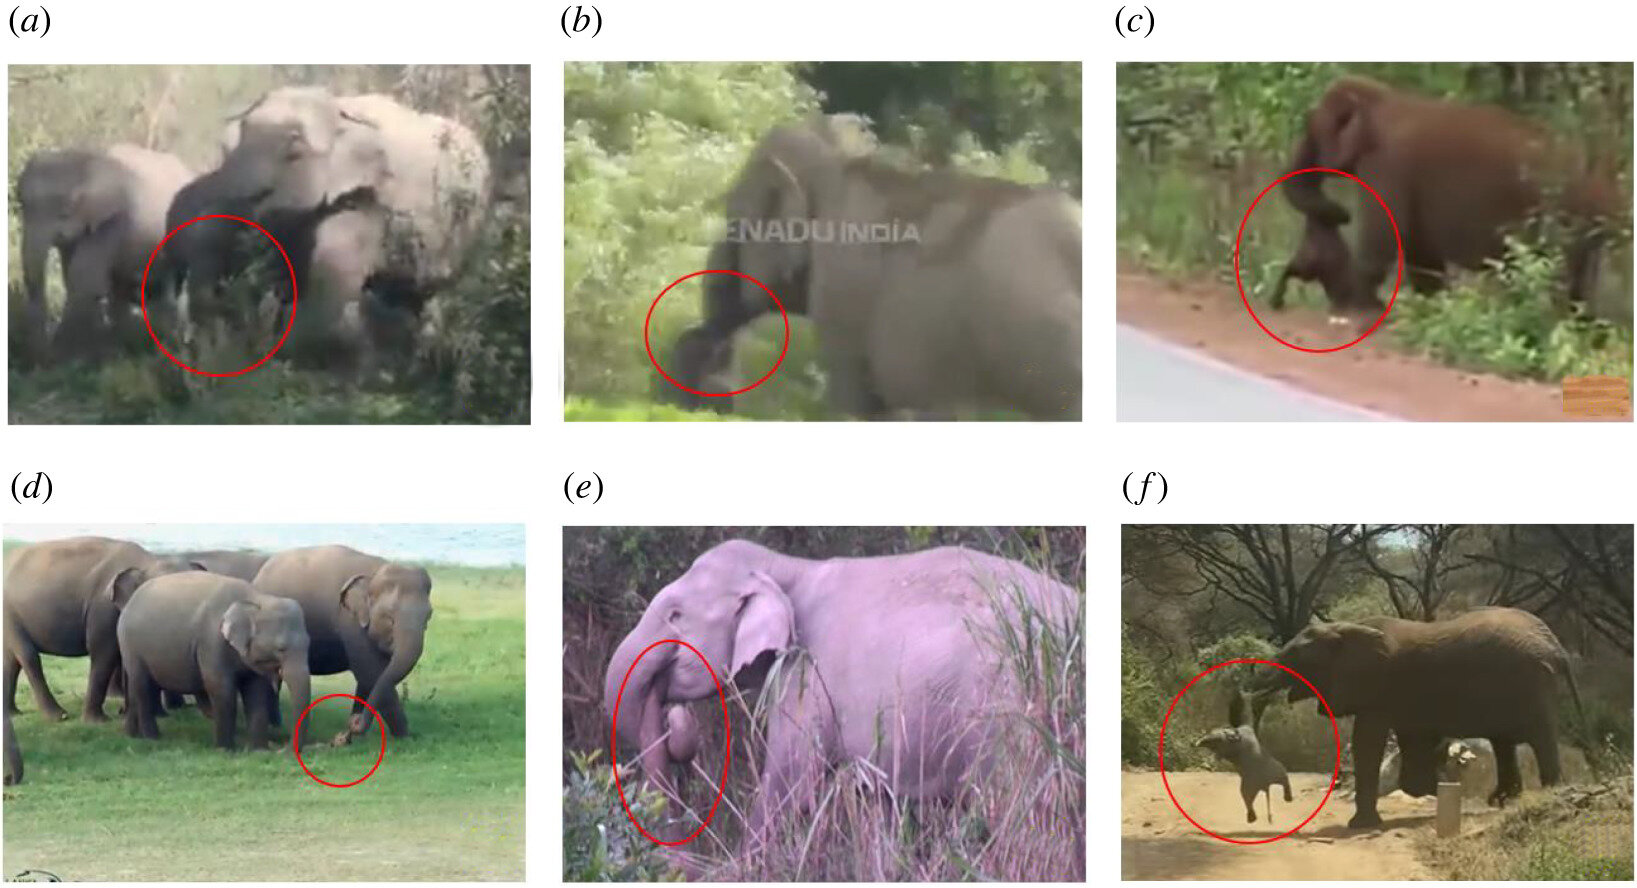 Researchers study YouTube videos to learn more about how wild elephants react to..